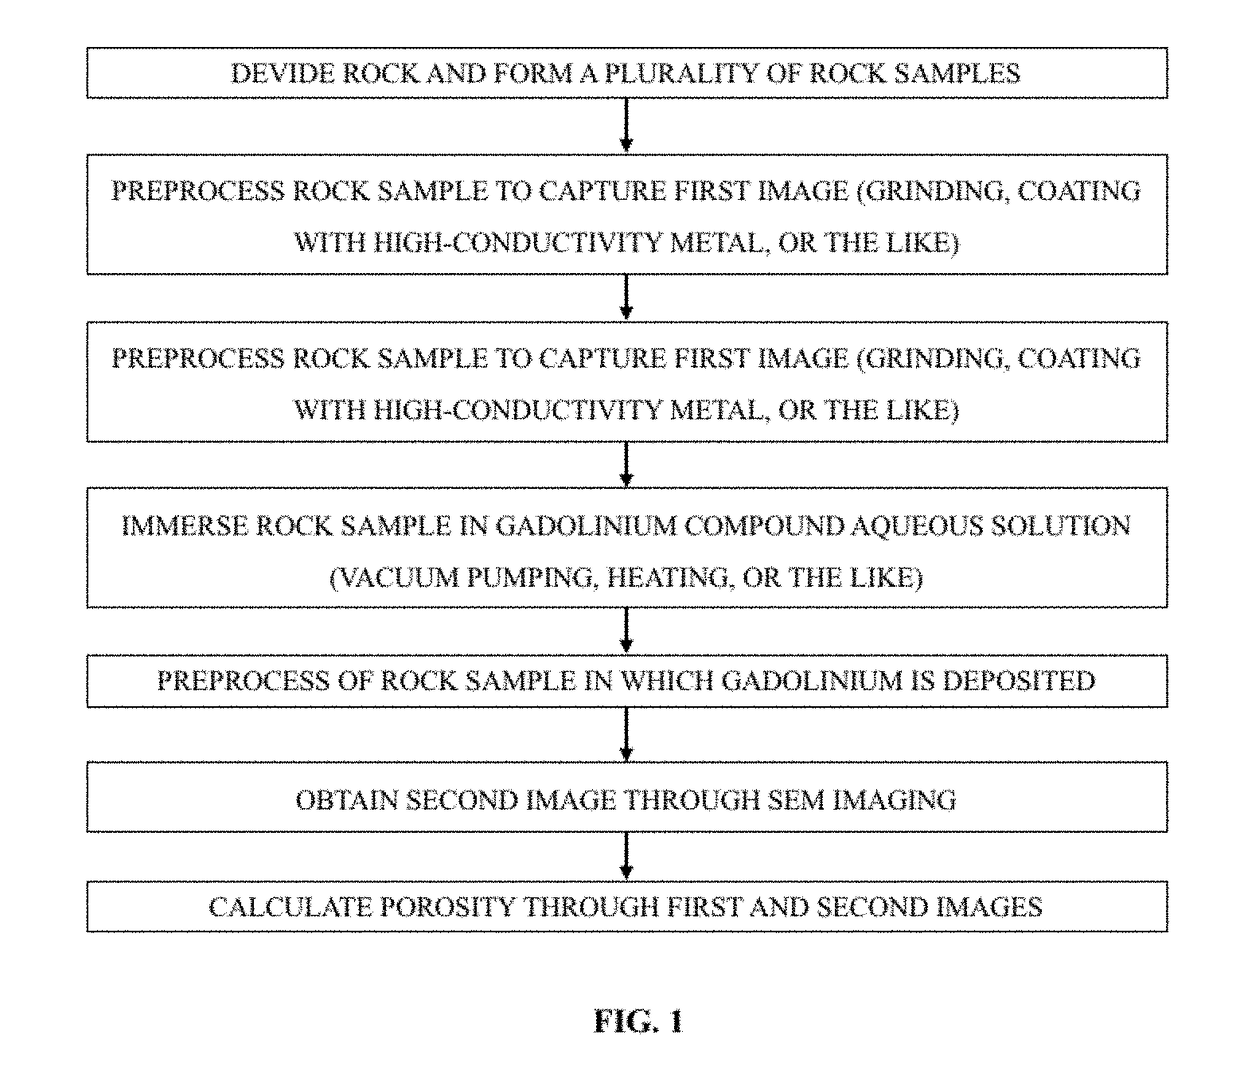 Method for porosity measurement using sem images of rock samples reacted with a gadolinium compound